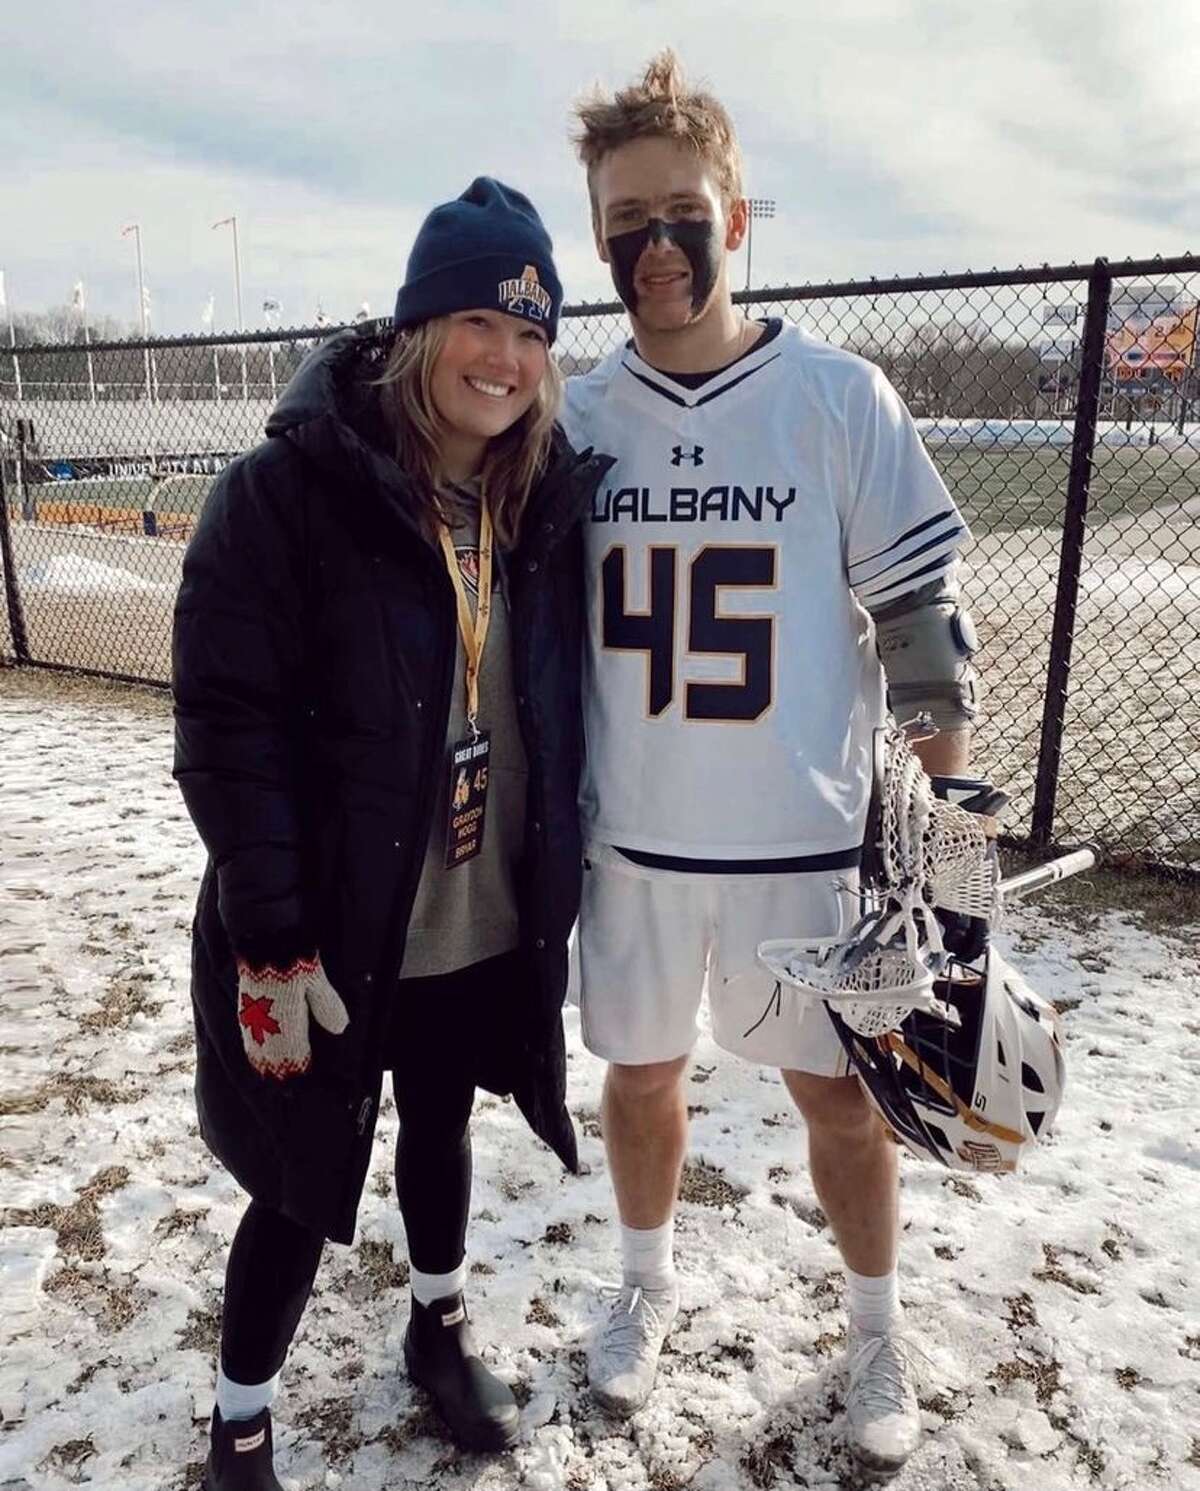 Bryar Hogg, left, and Graydon Hogg of the UAlbany women's and men's lacrosse teams, respectively.